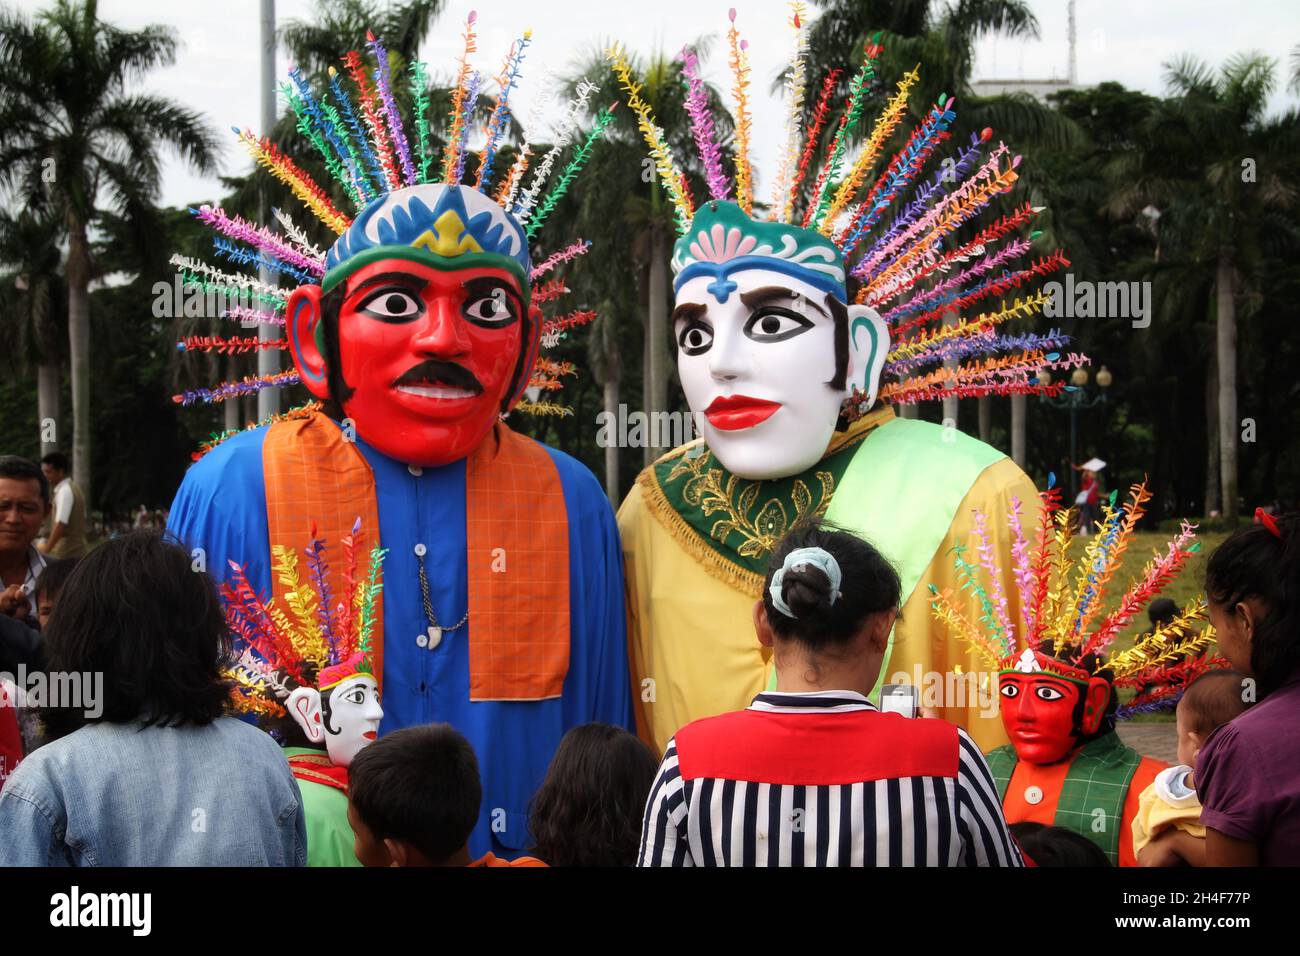 Ondel-Ondel, Large Puppets from Betawi, Jakarta, Indonesia. Stock Photo